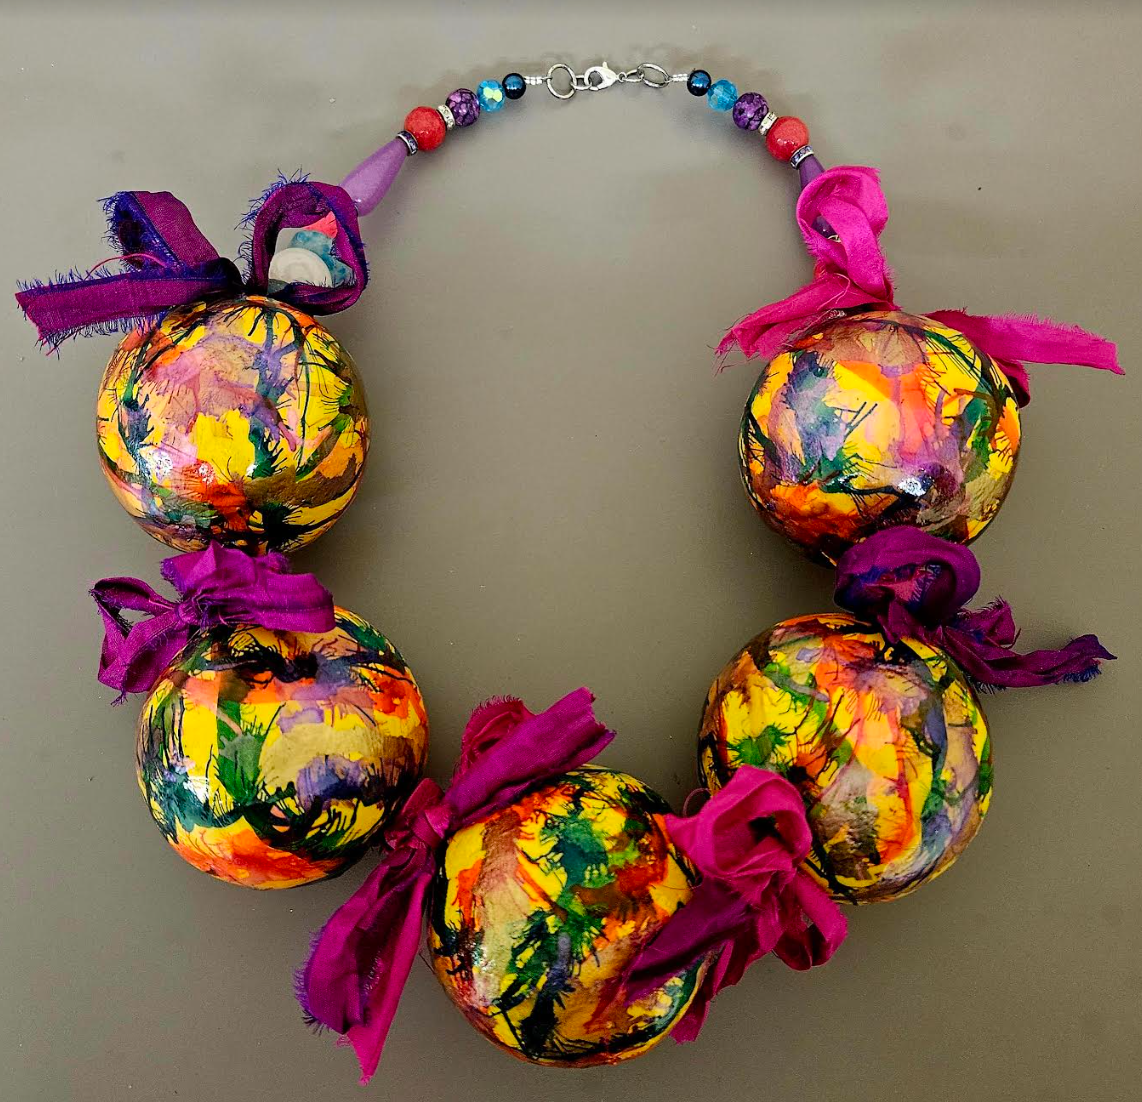 Massive Sculpted Alcohol Ink Ball Chest Piece with Suri Silk Bows, Wearable Art Neck Candy from Kat Kouture, Whimsical Lightweight Orb Statement Necklace